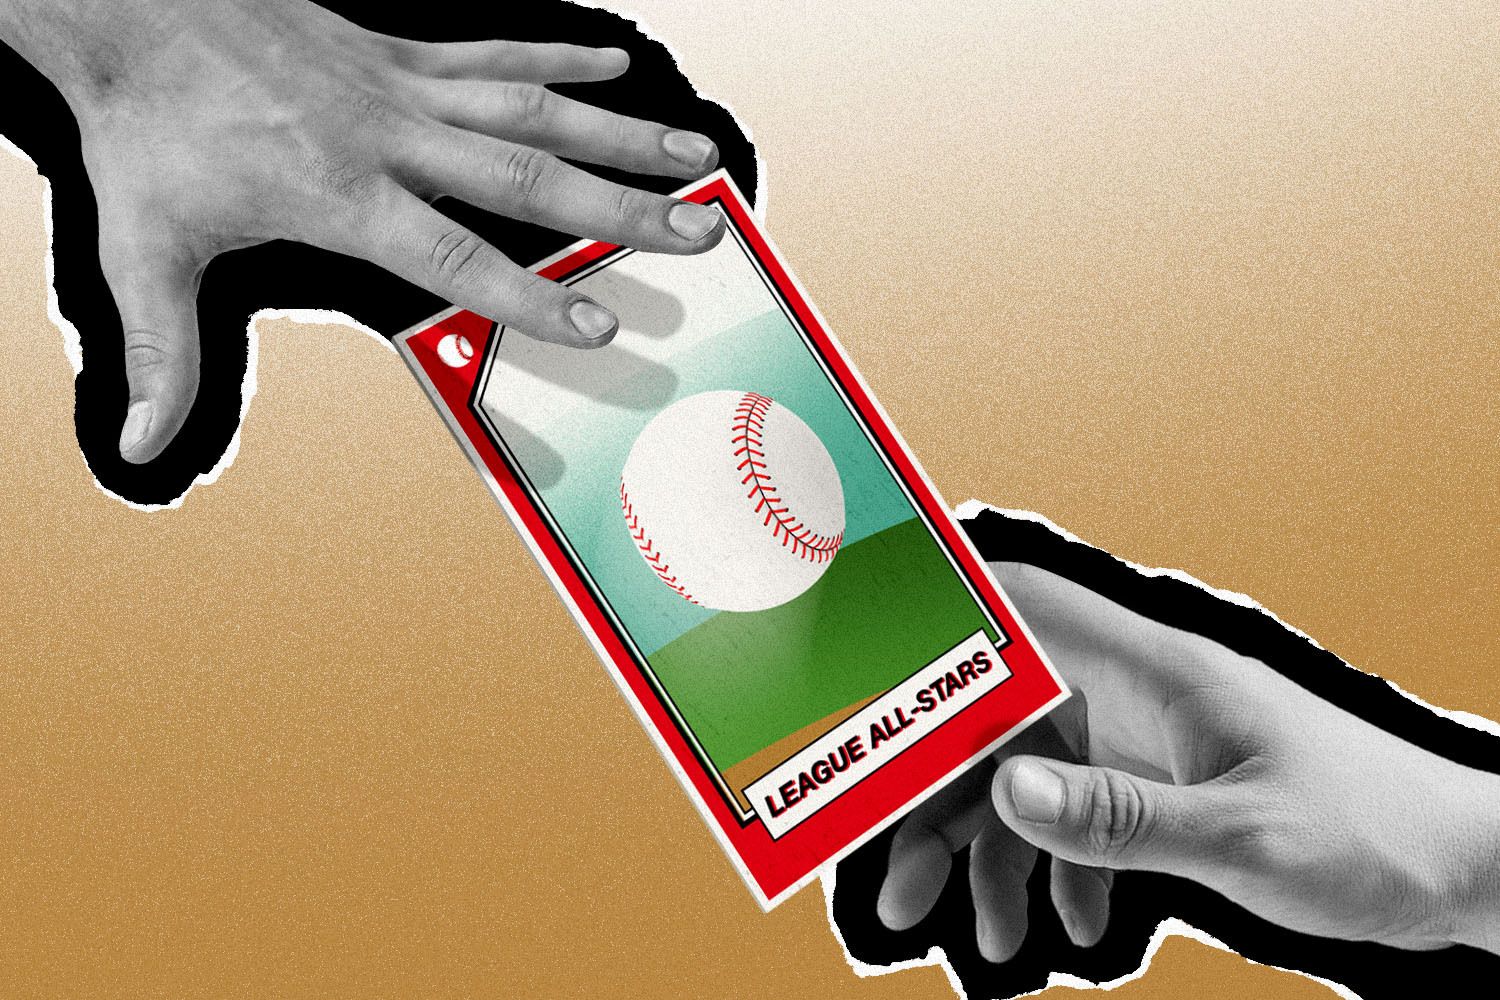 Sports trading cards see a resurgence during the pandemic